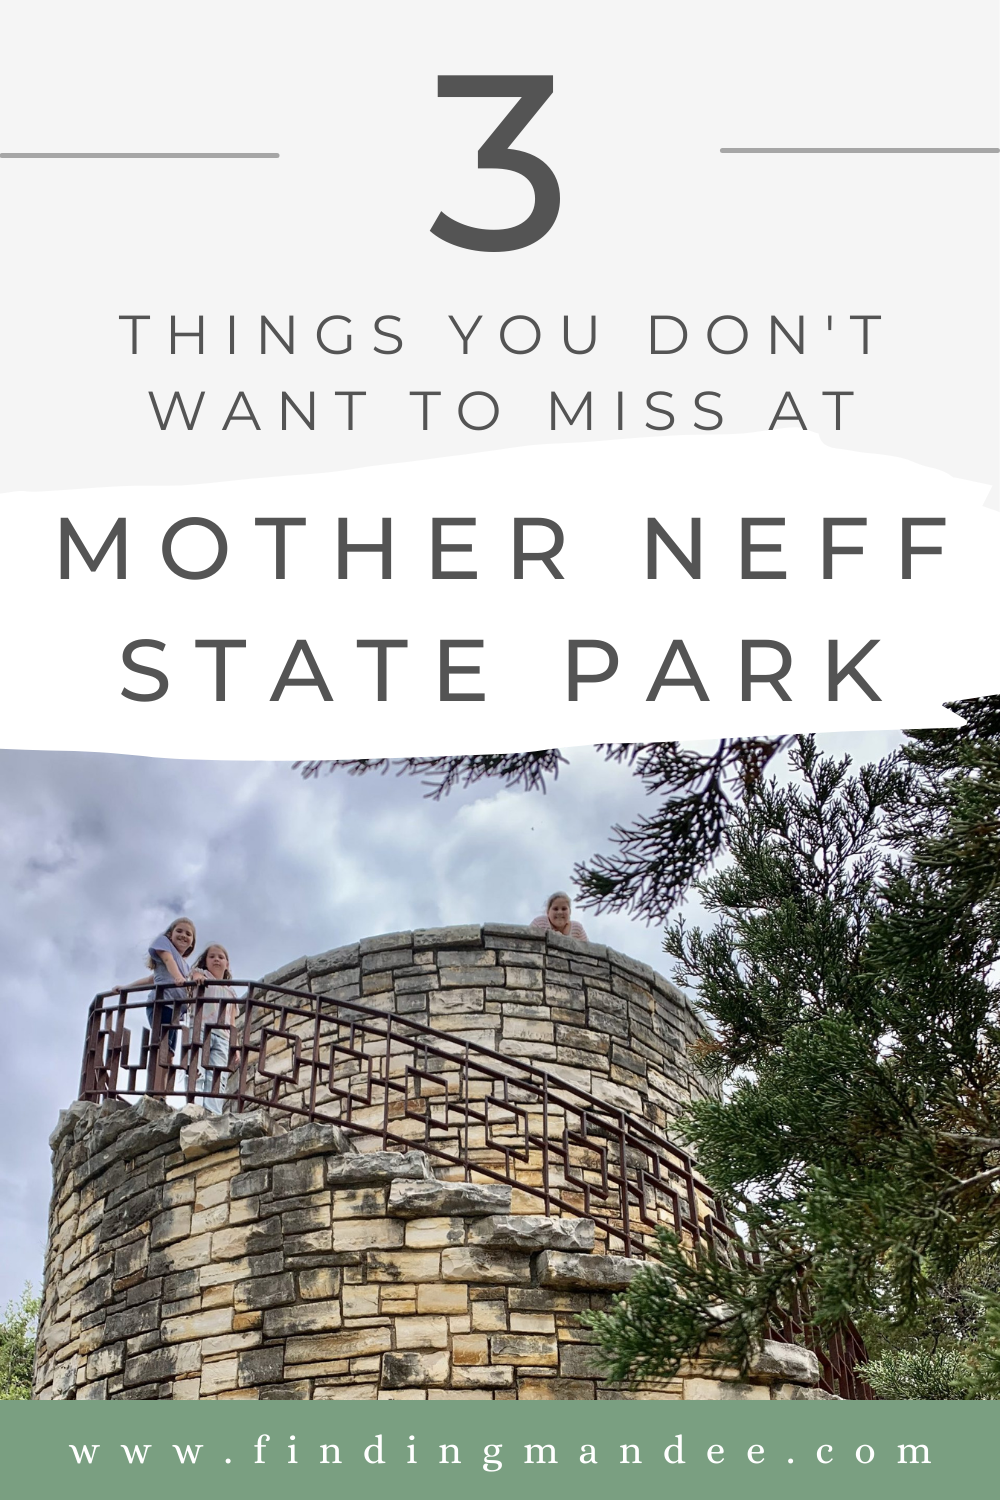 3 Things You Don't Want to Miss at Mother Neff State Park Near Waco | Finding Mandee